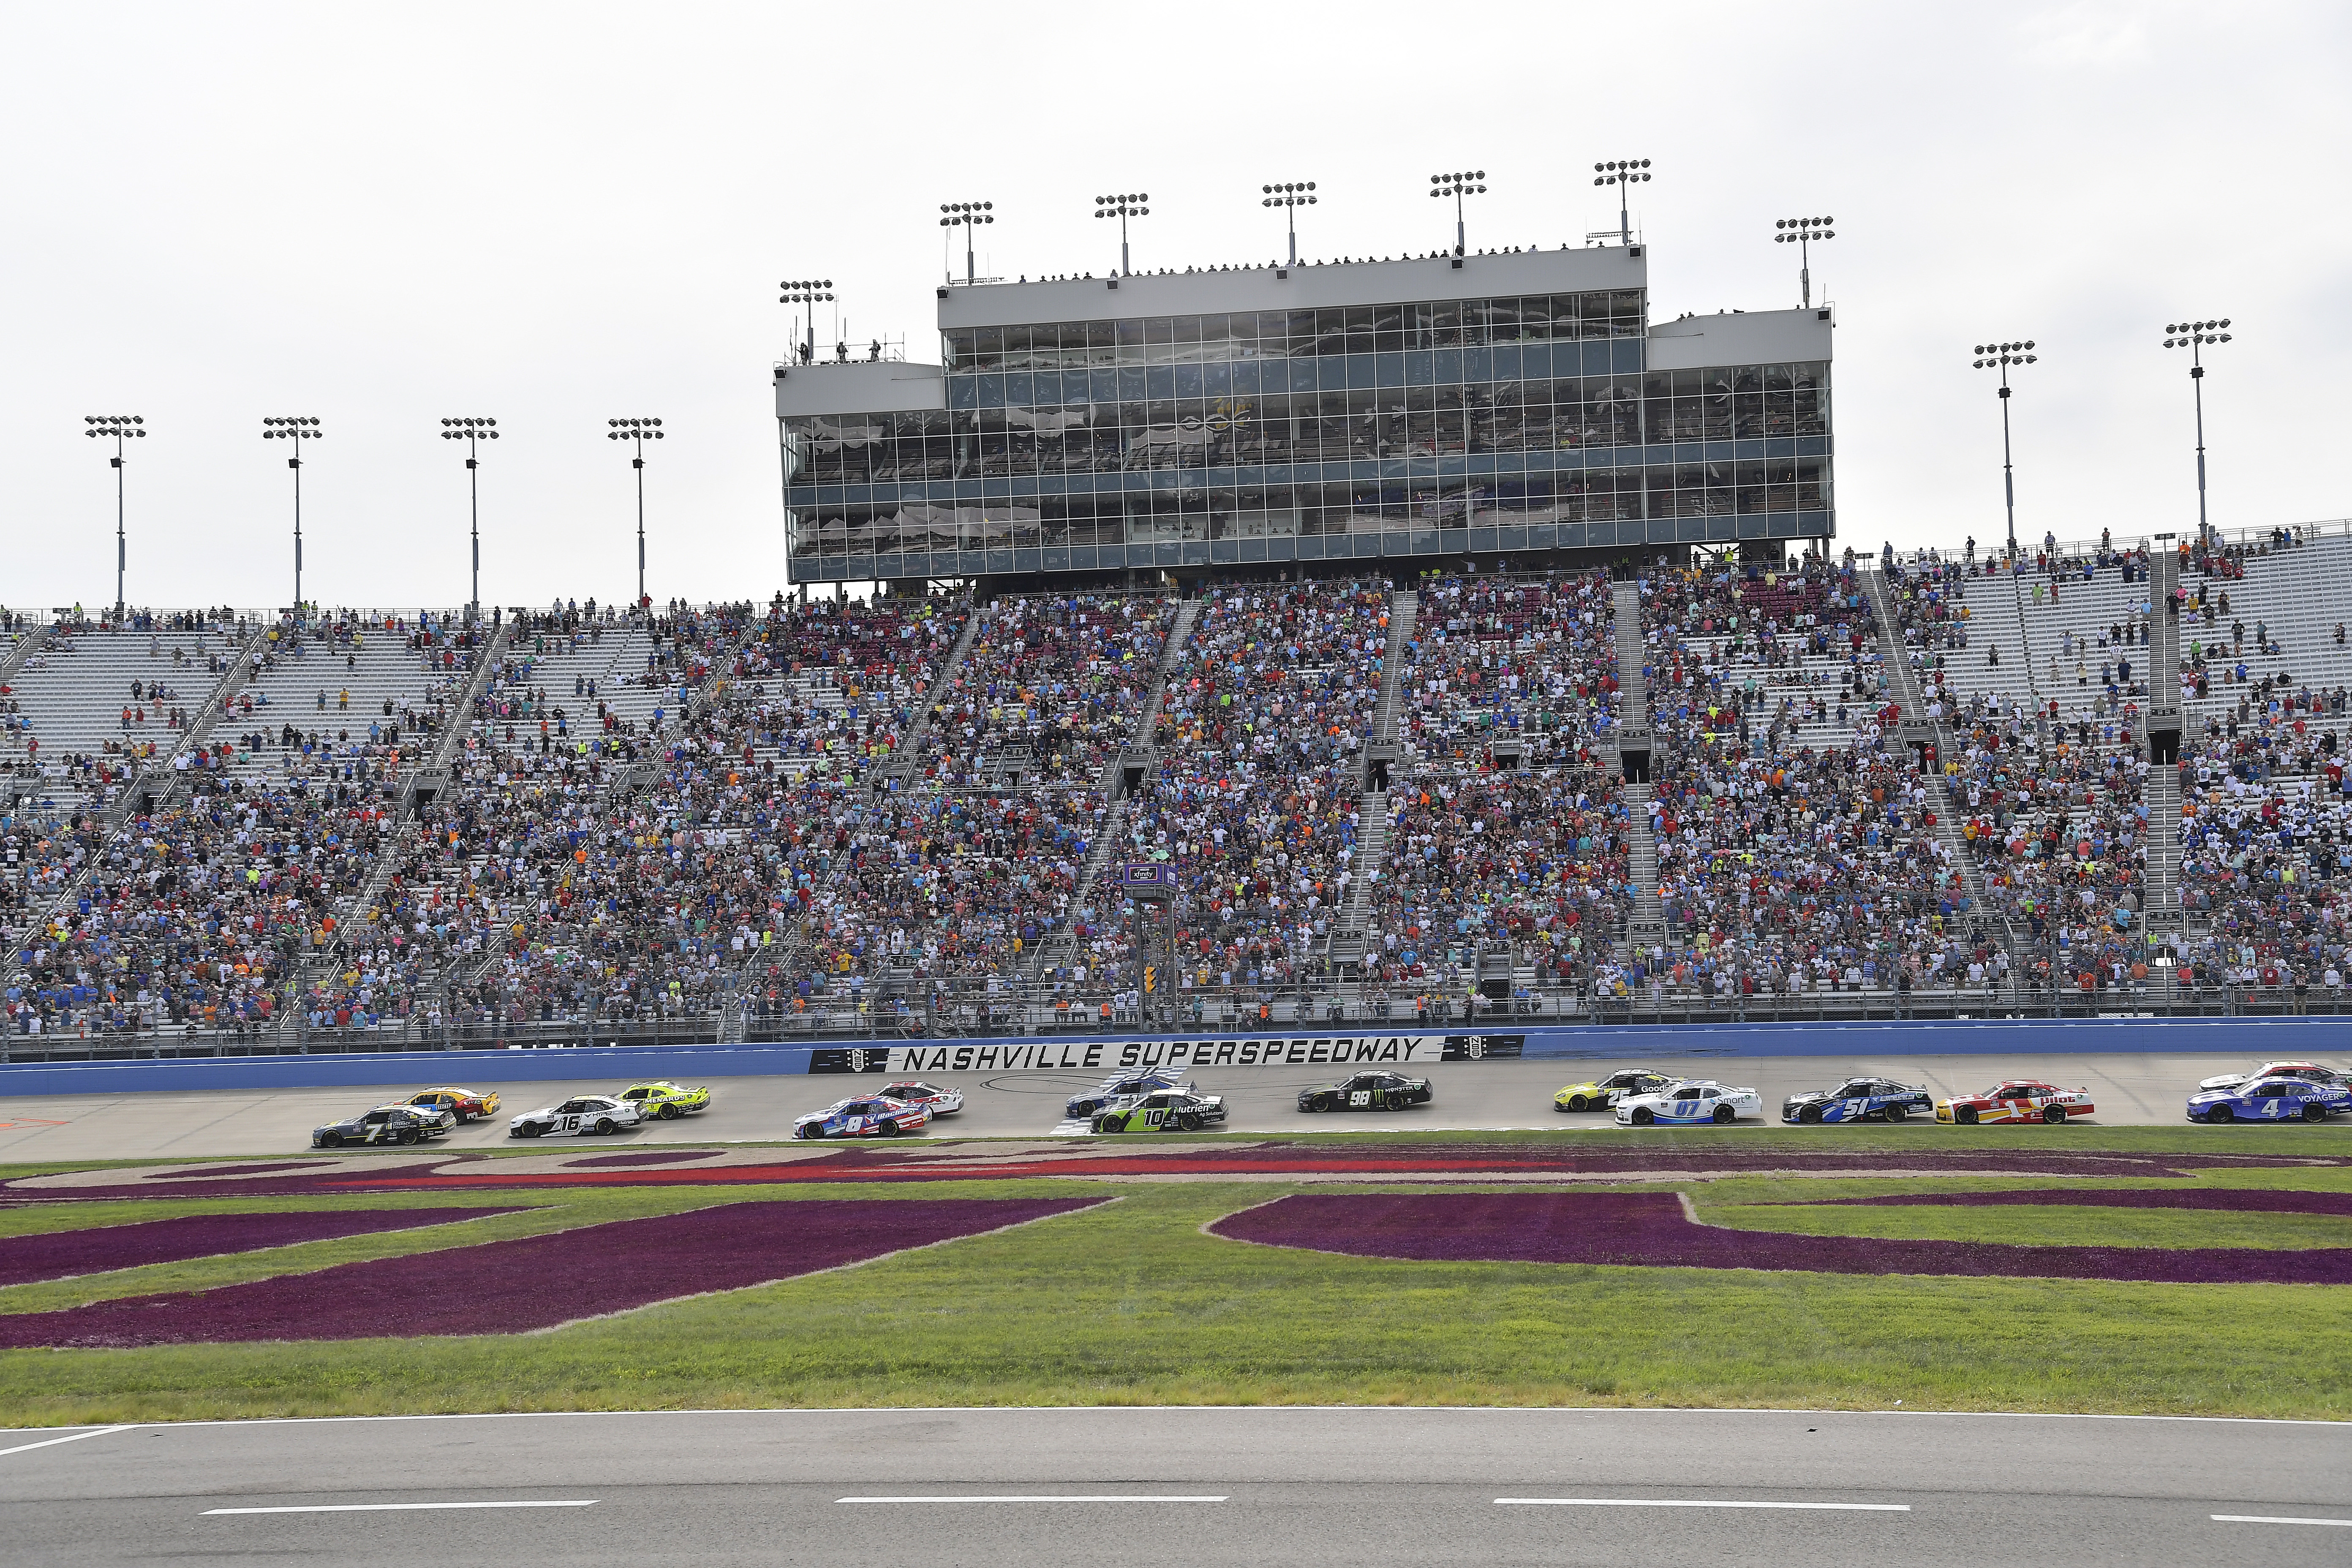 A general view of cars on track during the NASCAR Xfinity Series Tennessee Lottery 250 at Nashville Superspeedway on June 19, 2021 in Lebanon, Tennessee.